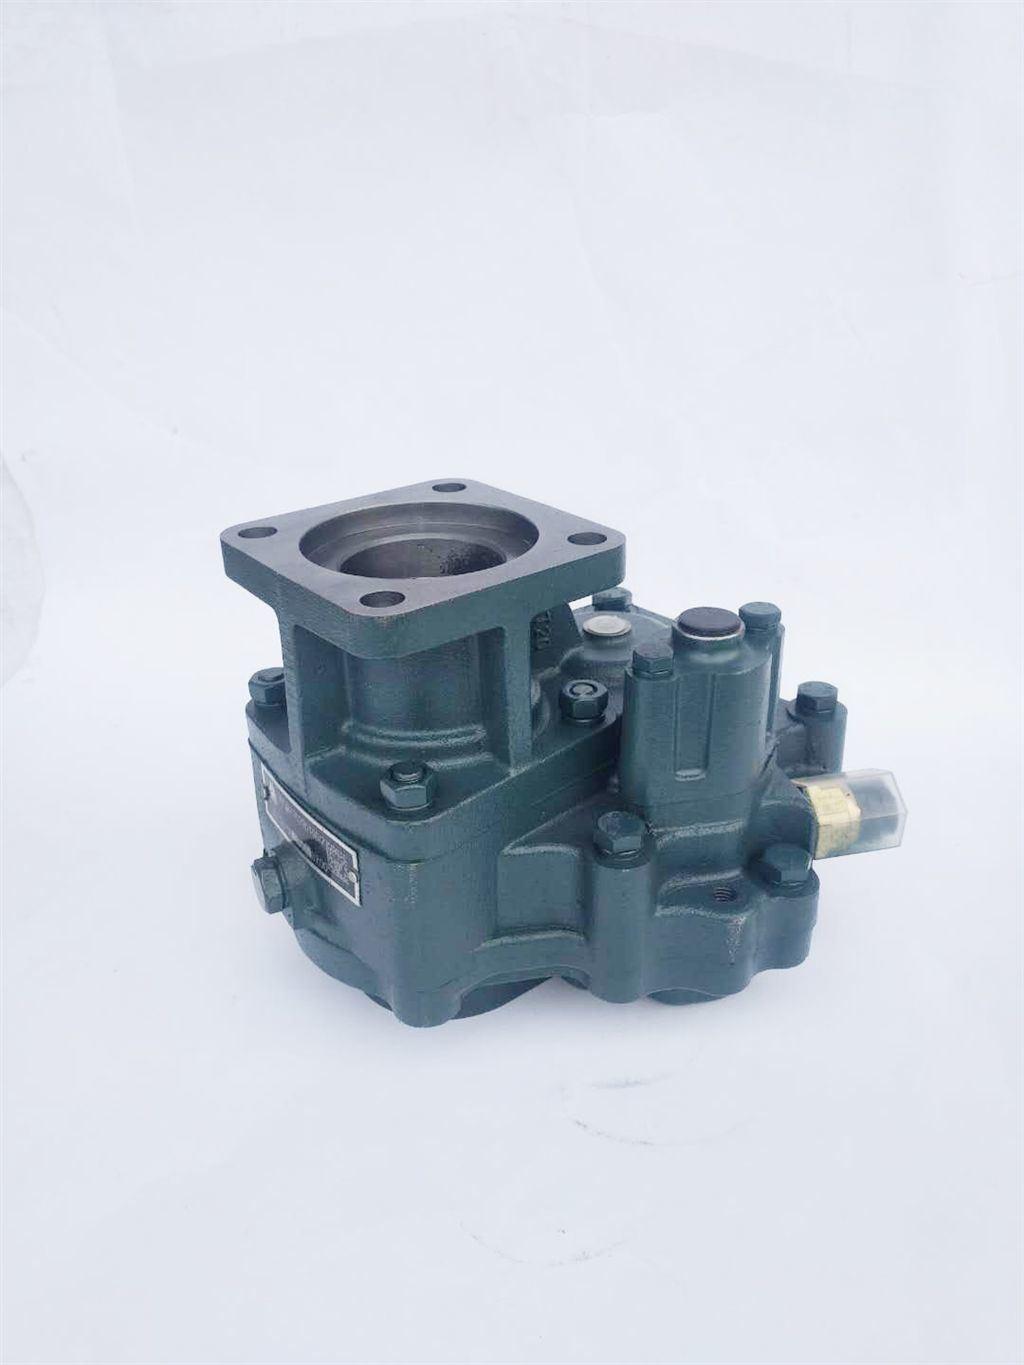 Hw50 Direct-Connected Pto for HOWO Dump Truck Power Takeoff with Gearbox Wg9700290150